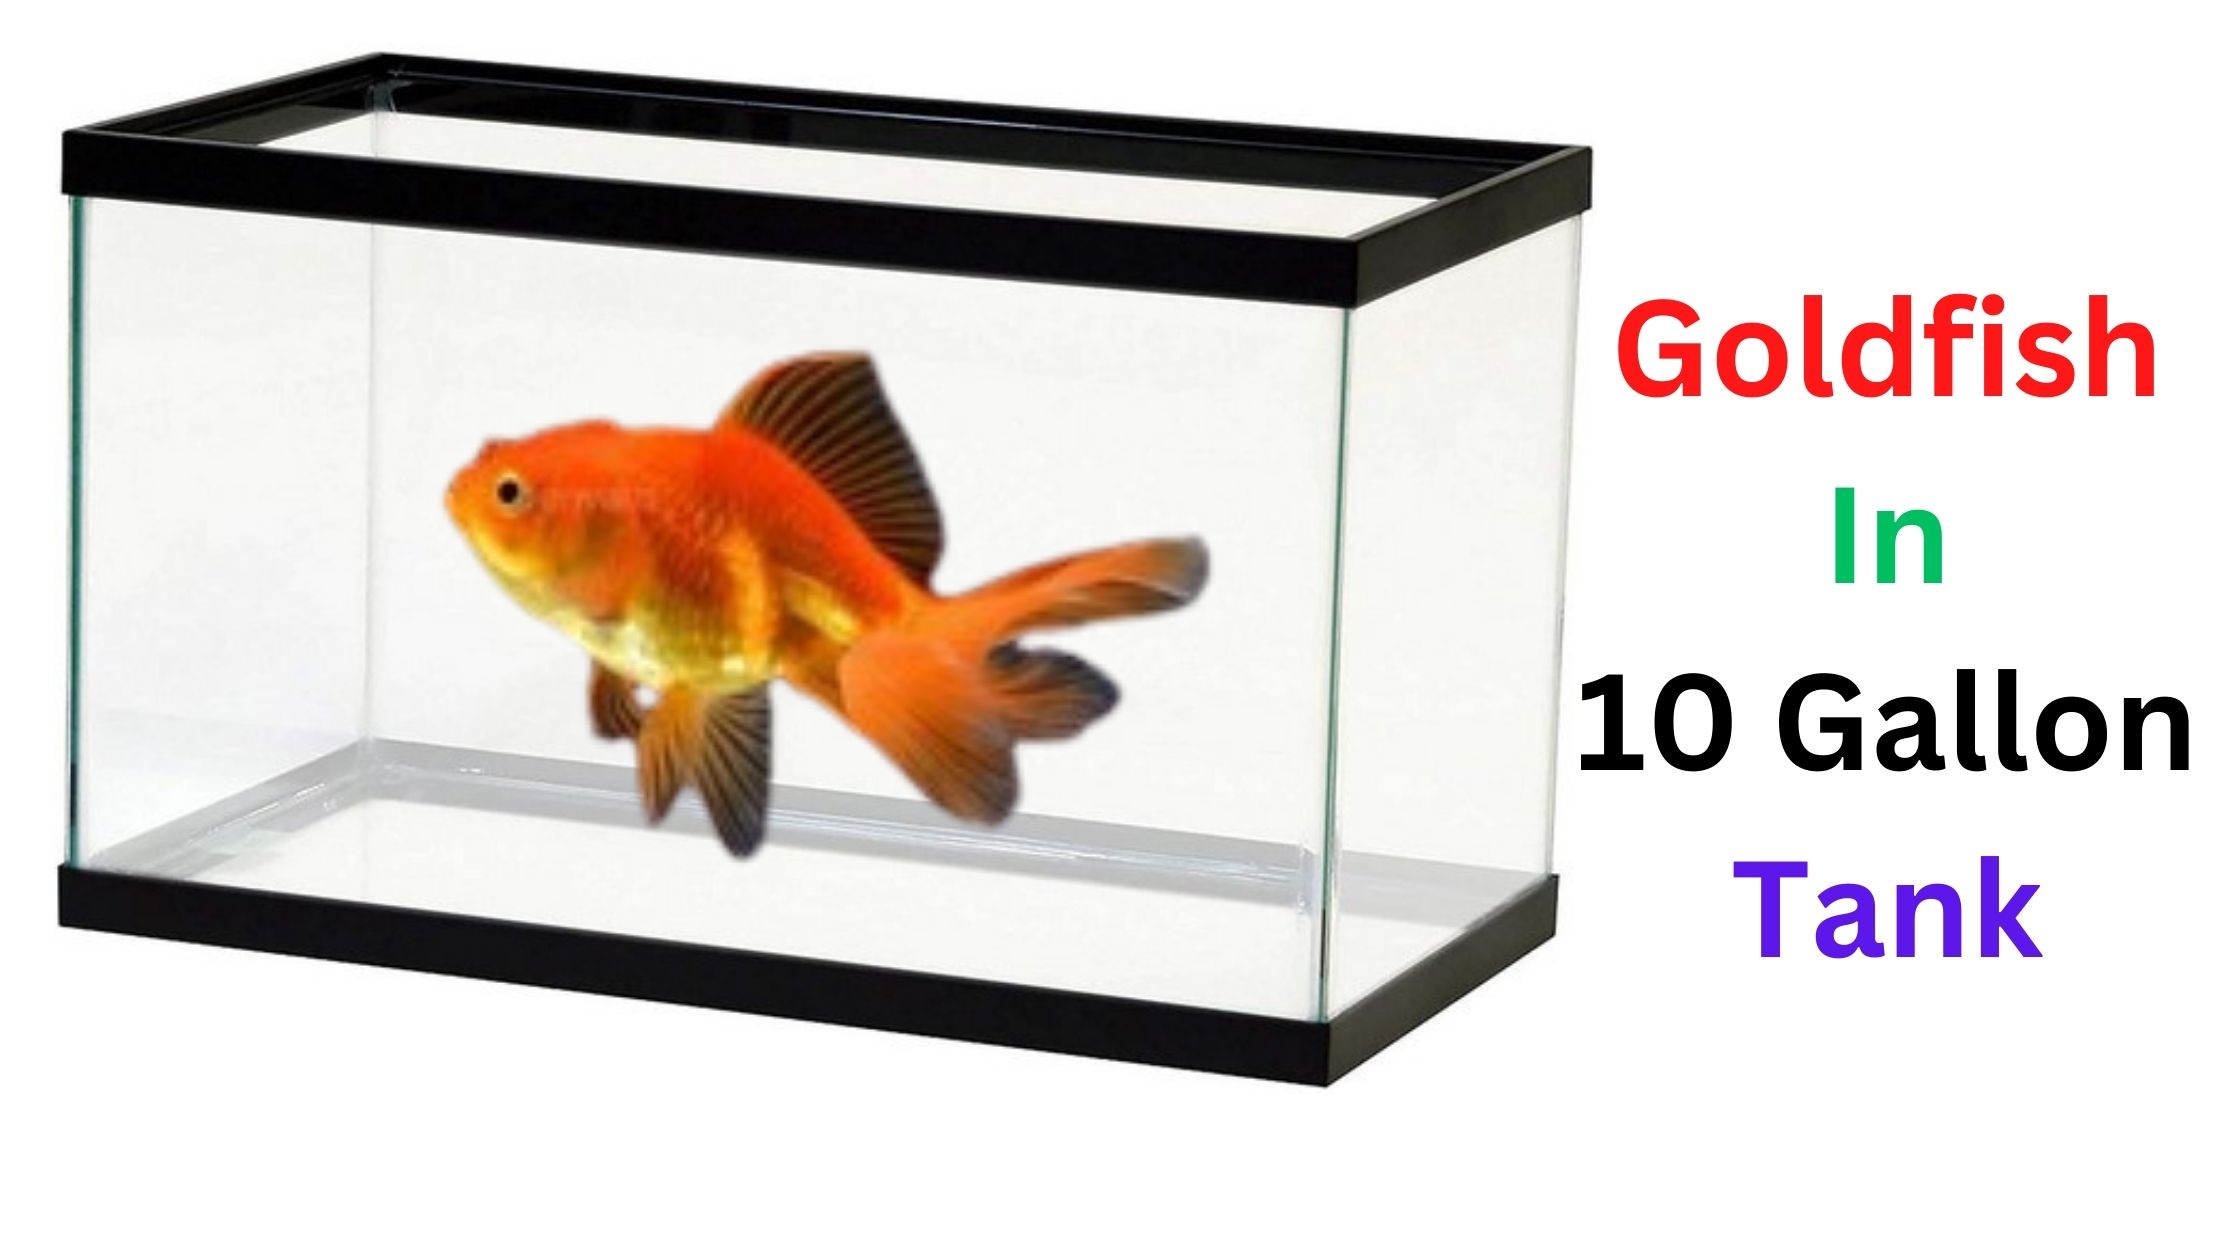 The Ultimate Guide to Keeping Goldfish in a 10 Gallon Tank